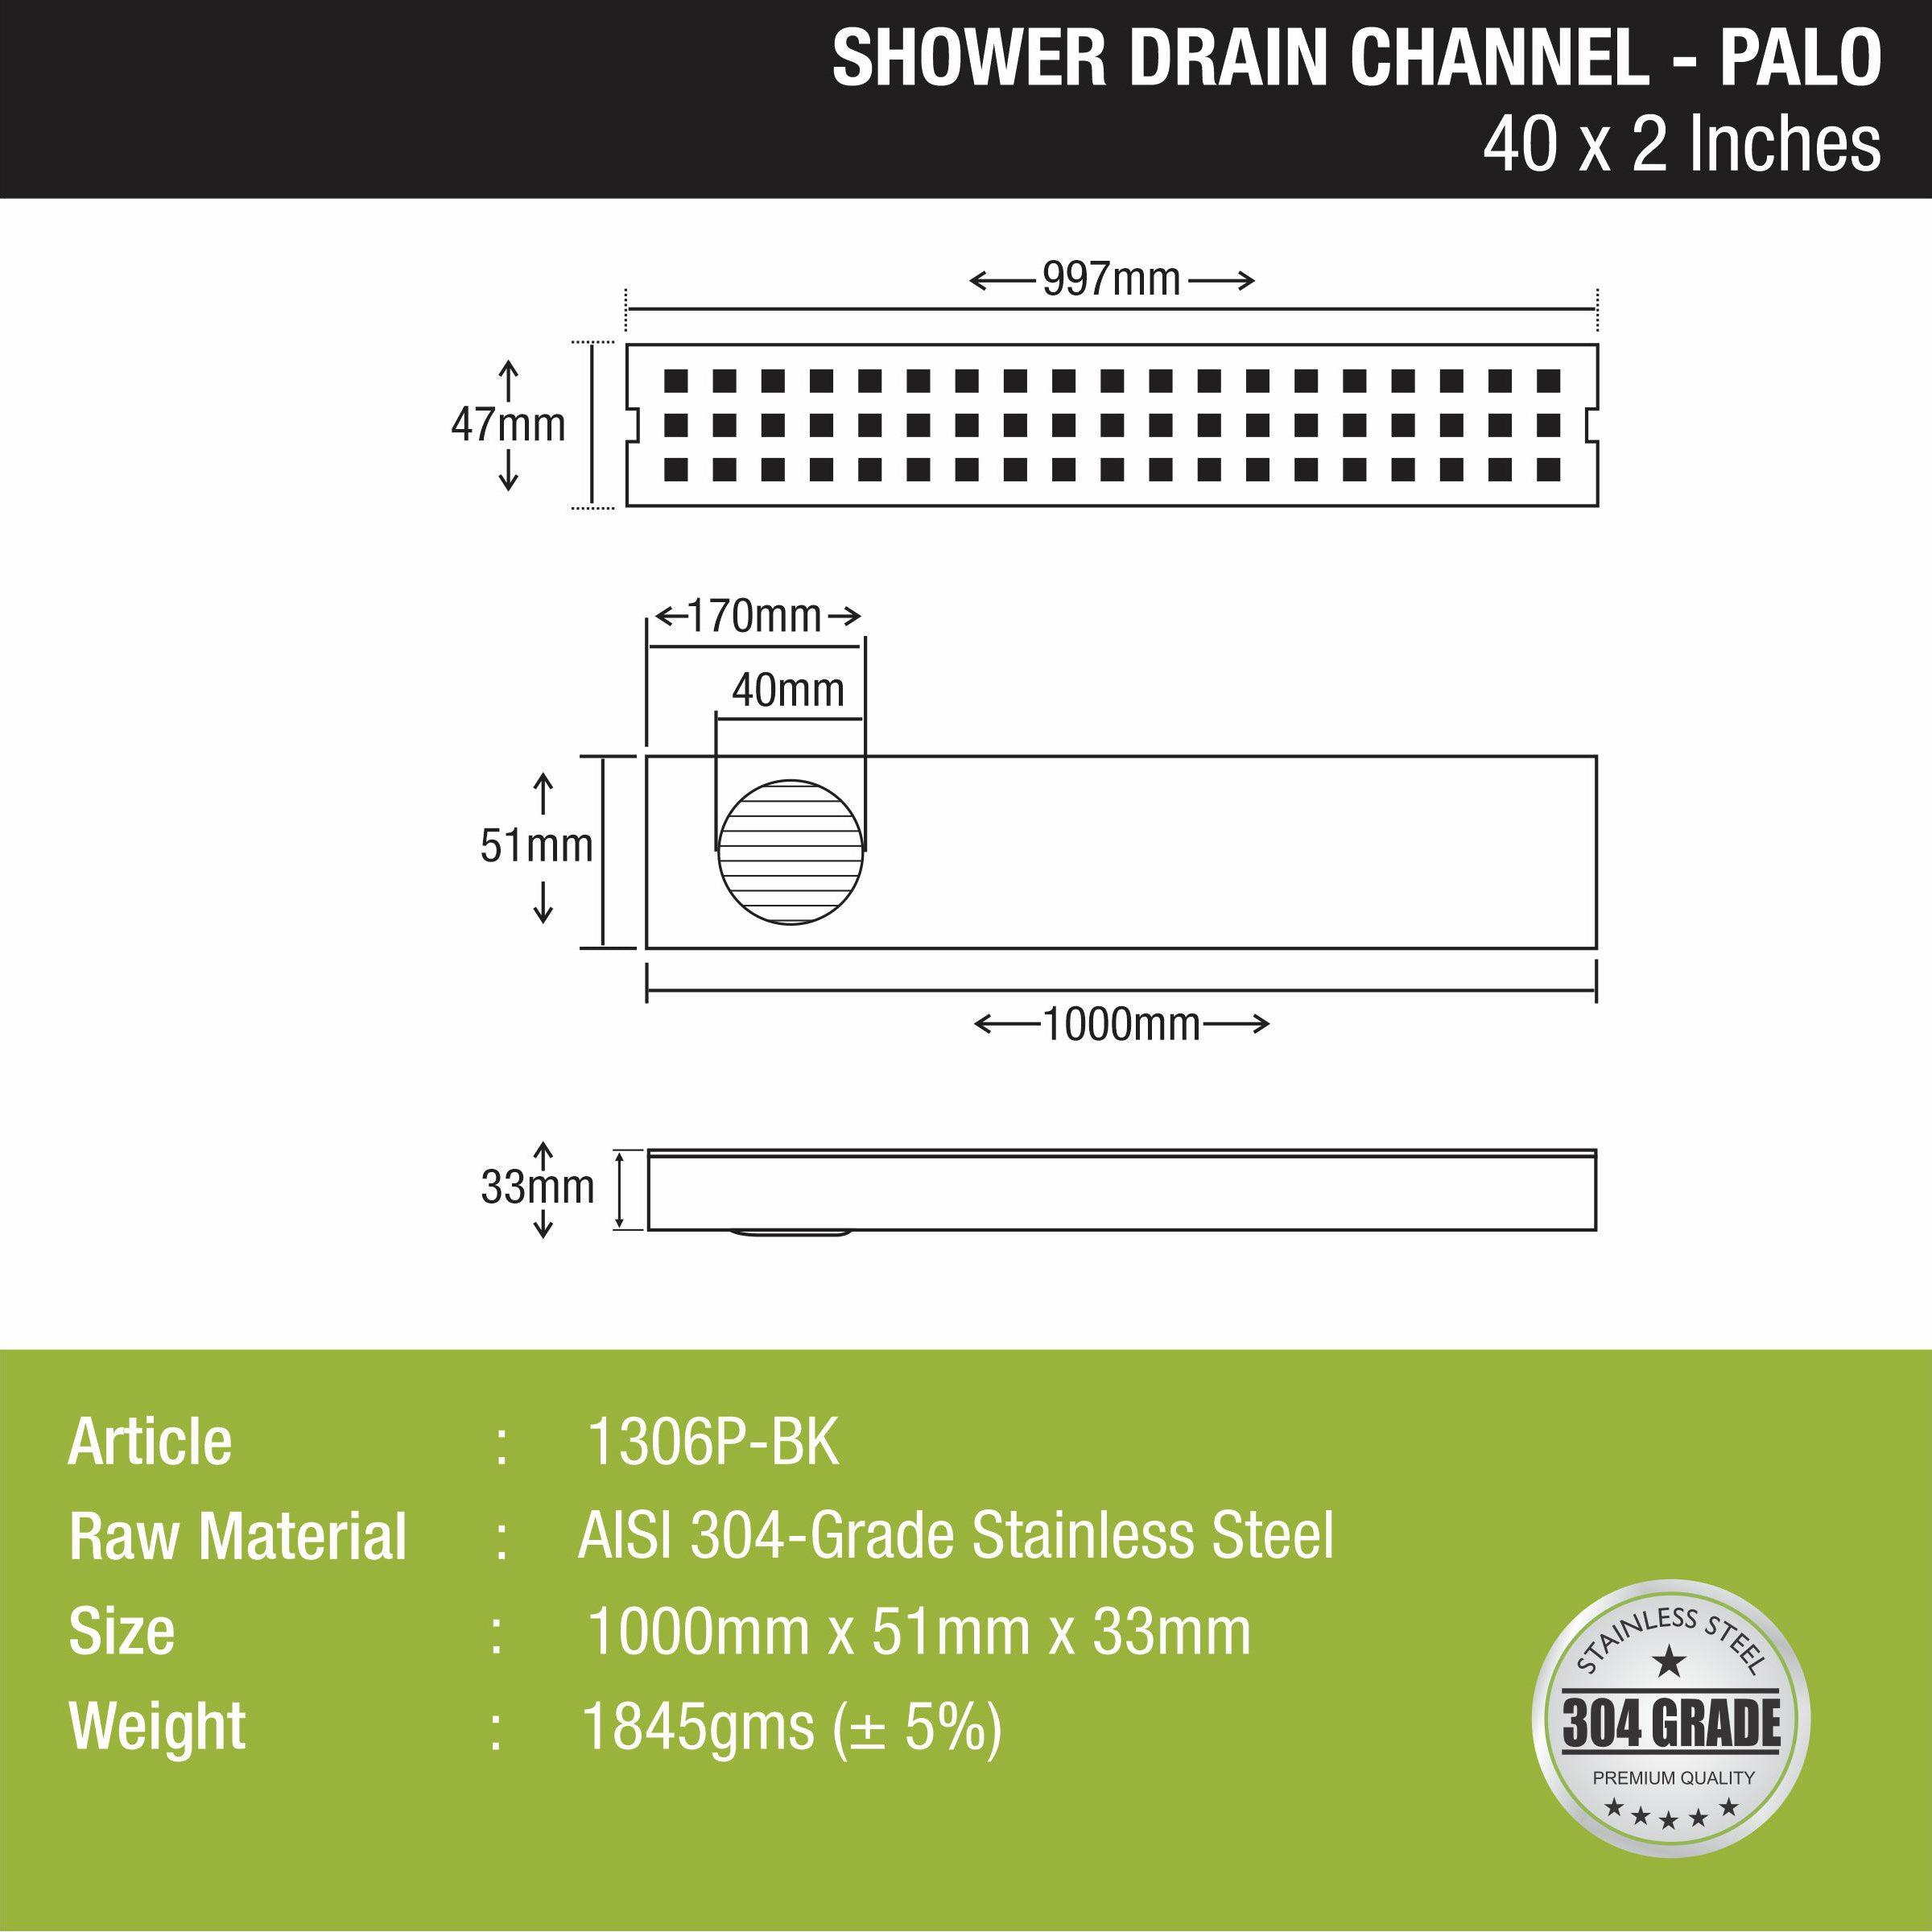 Palo Shower Drain Channel - Black (40 x 2 Inches size and measurement